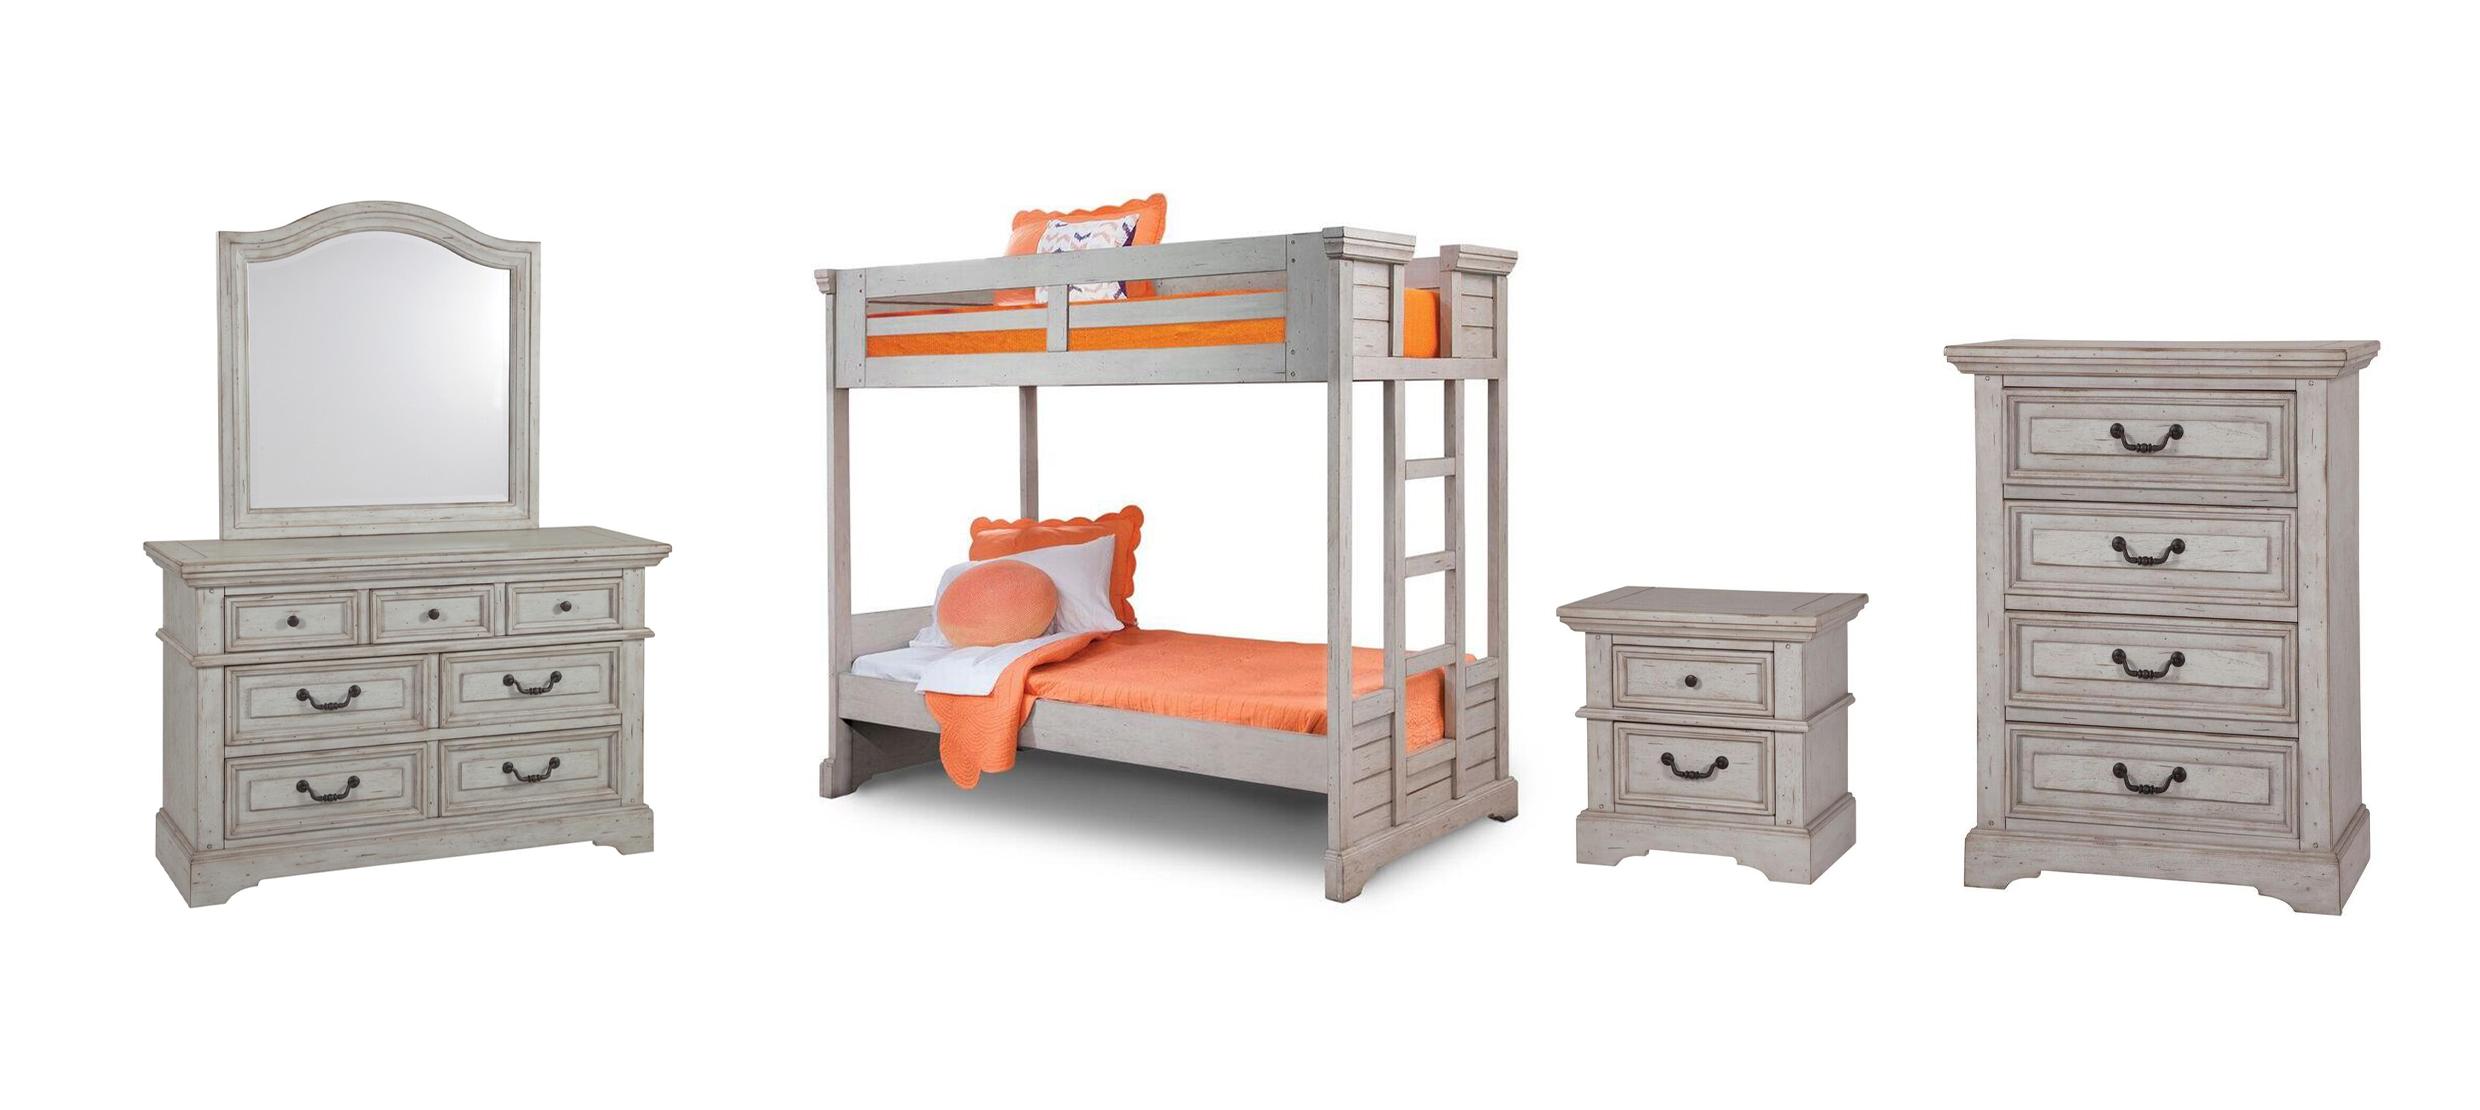 Classic, Traditional Twin Bunk Bed Set 7820 STONEBROOK 7820-33BNK-NDMC-5PC in Antique, Gray 